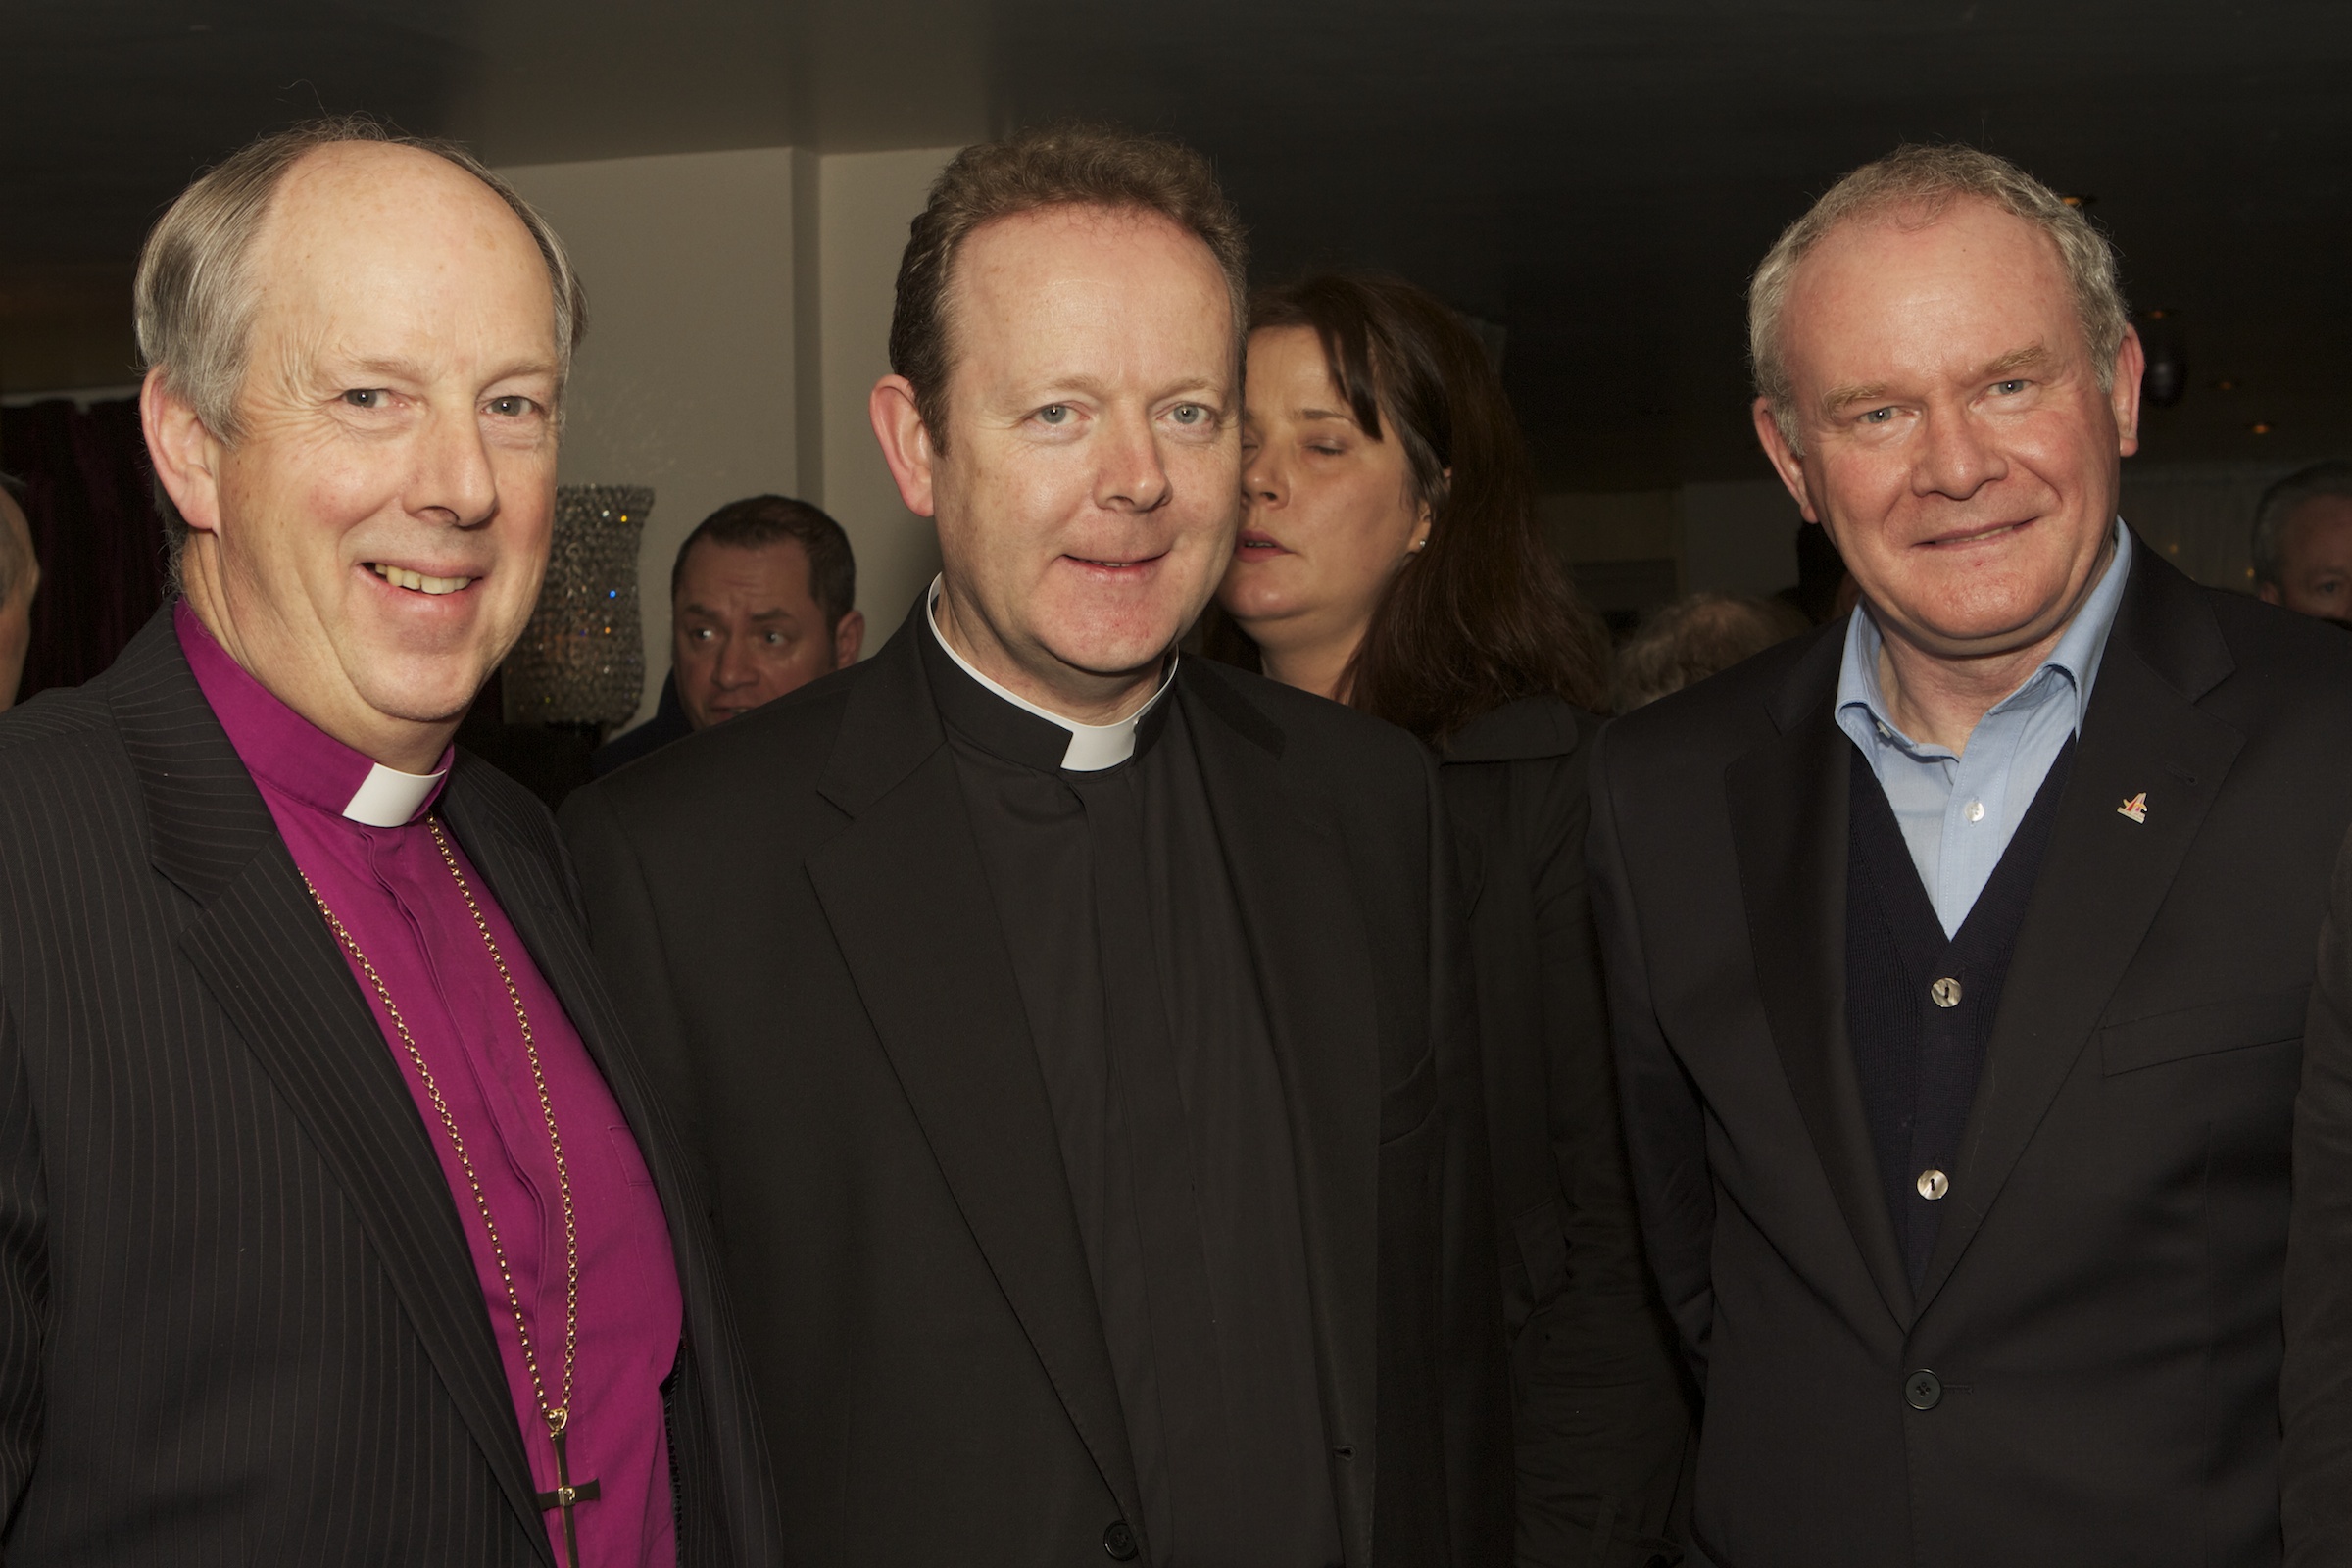 Martin with Church Leaders